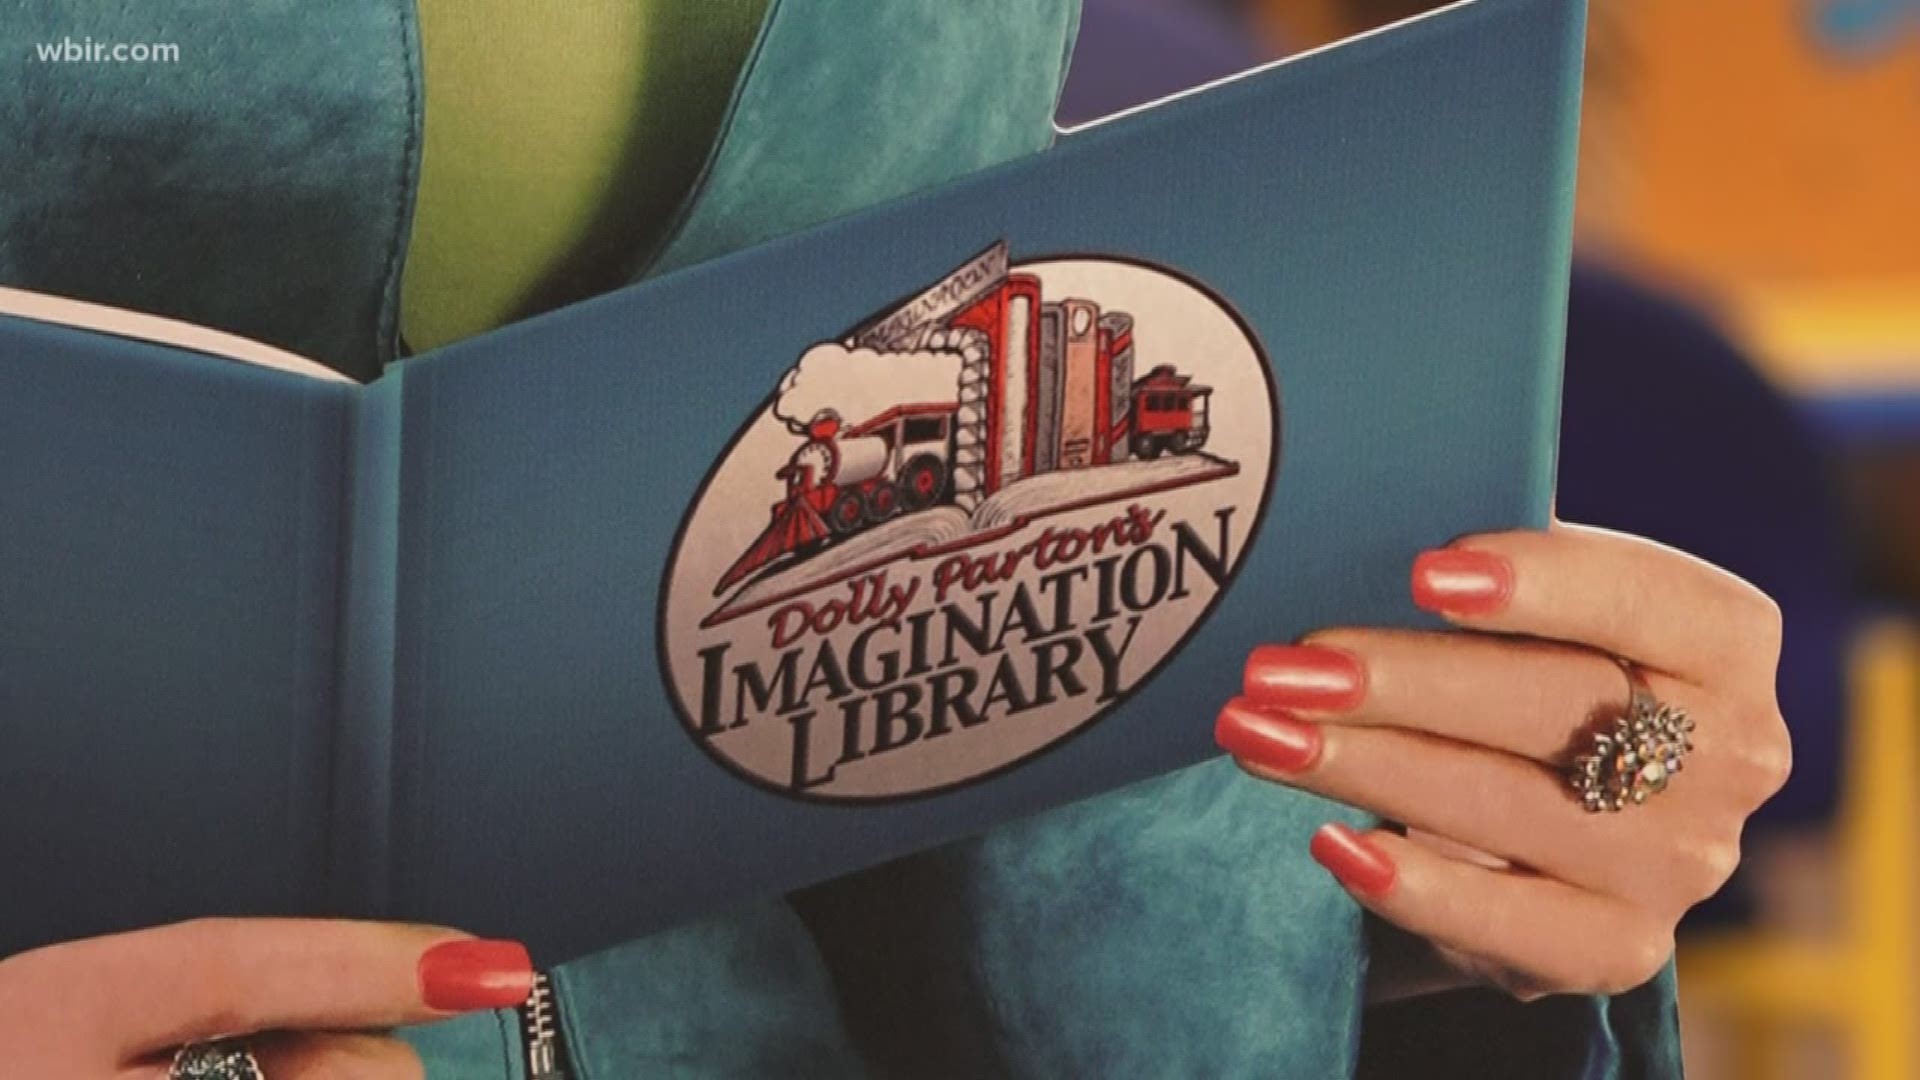 An investigation shows people and businesses are profiting off the books Dolly Parton gives away for free as part of Imagination Library. 10News Reporter Katie Inman has more on how they are breaking the rules of the Imagination Library.